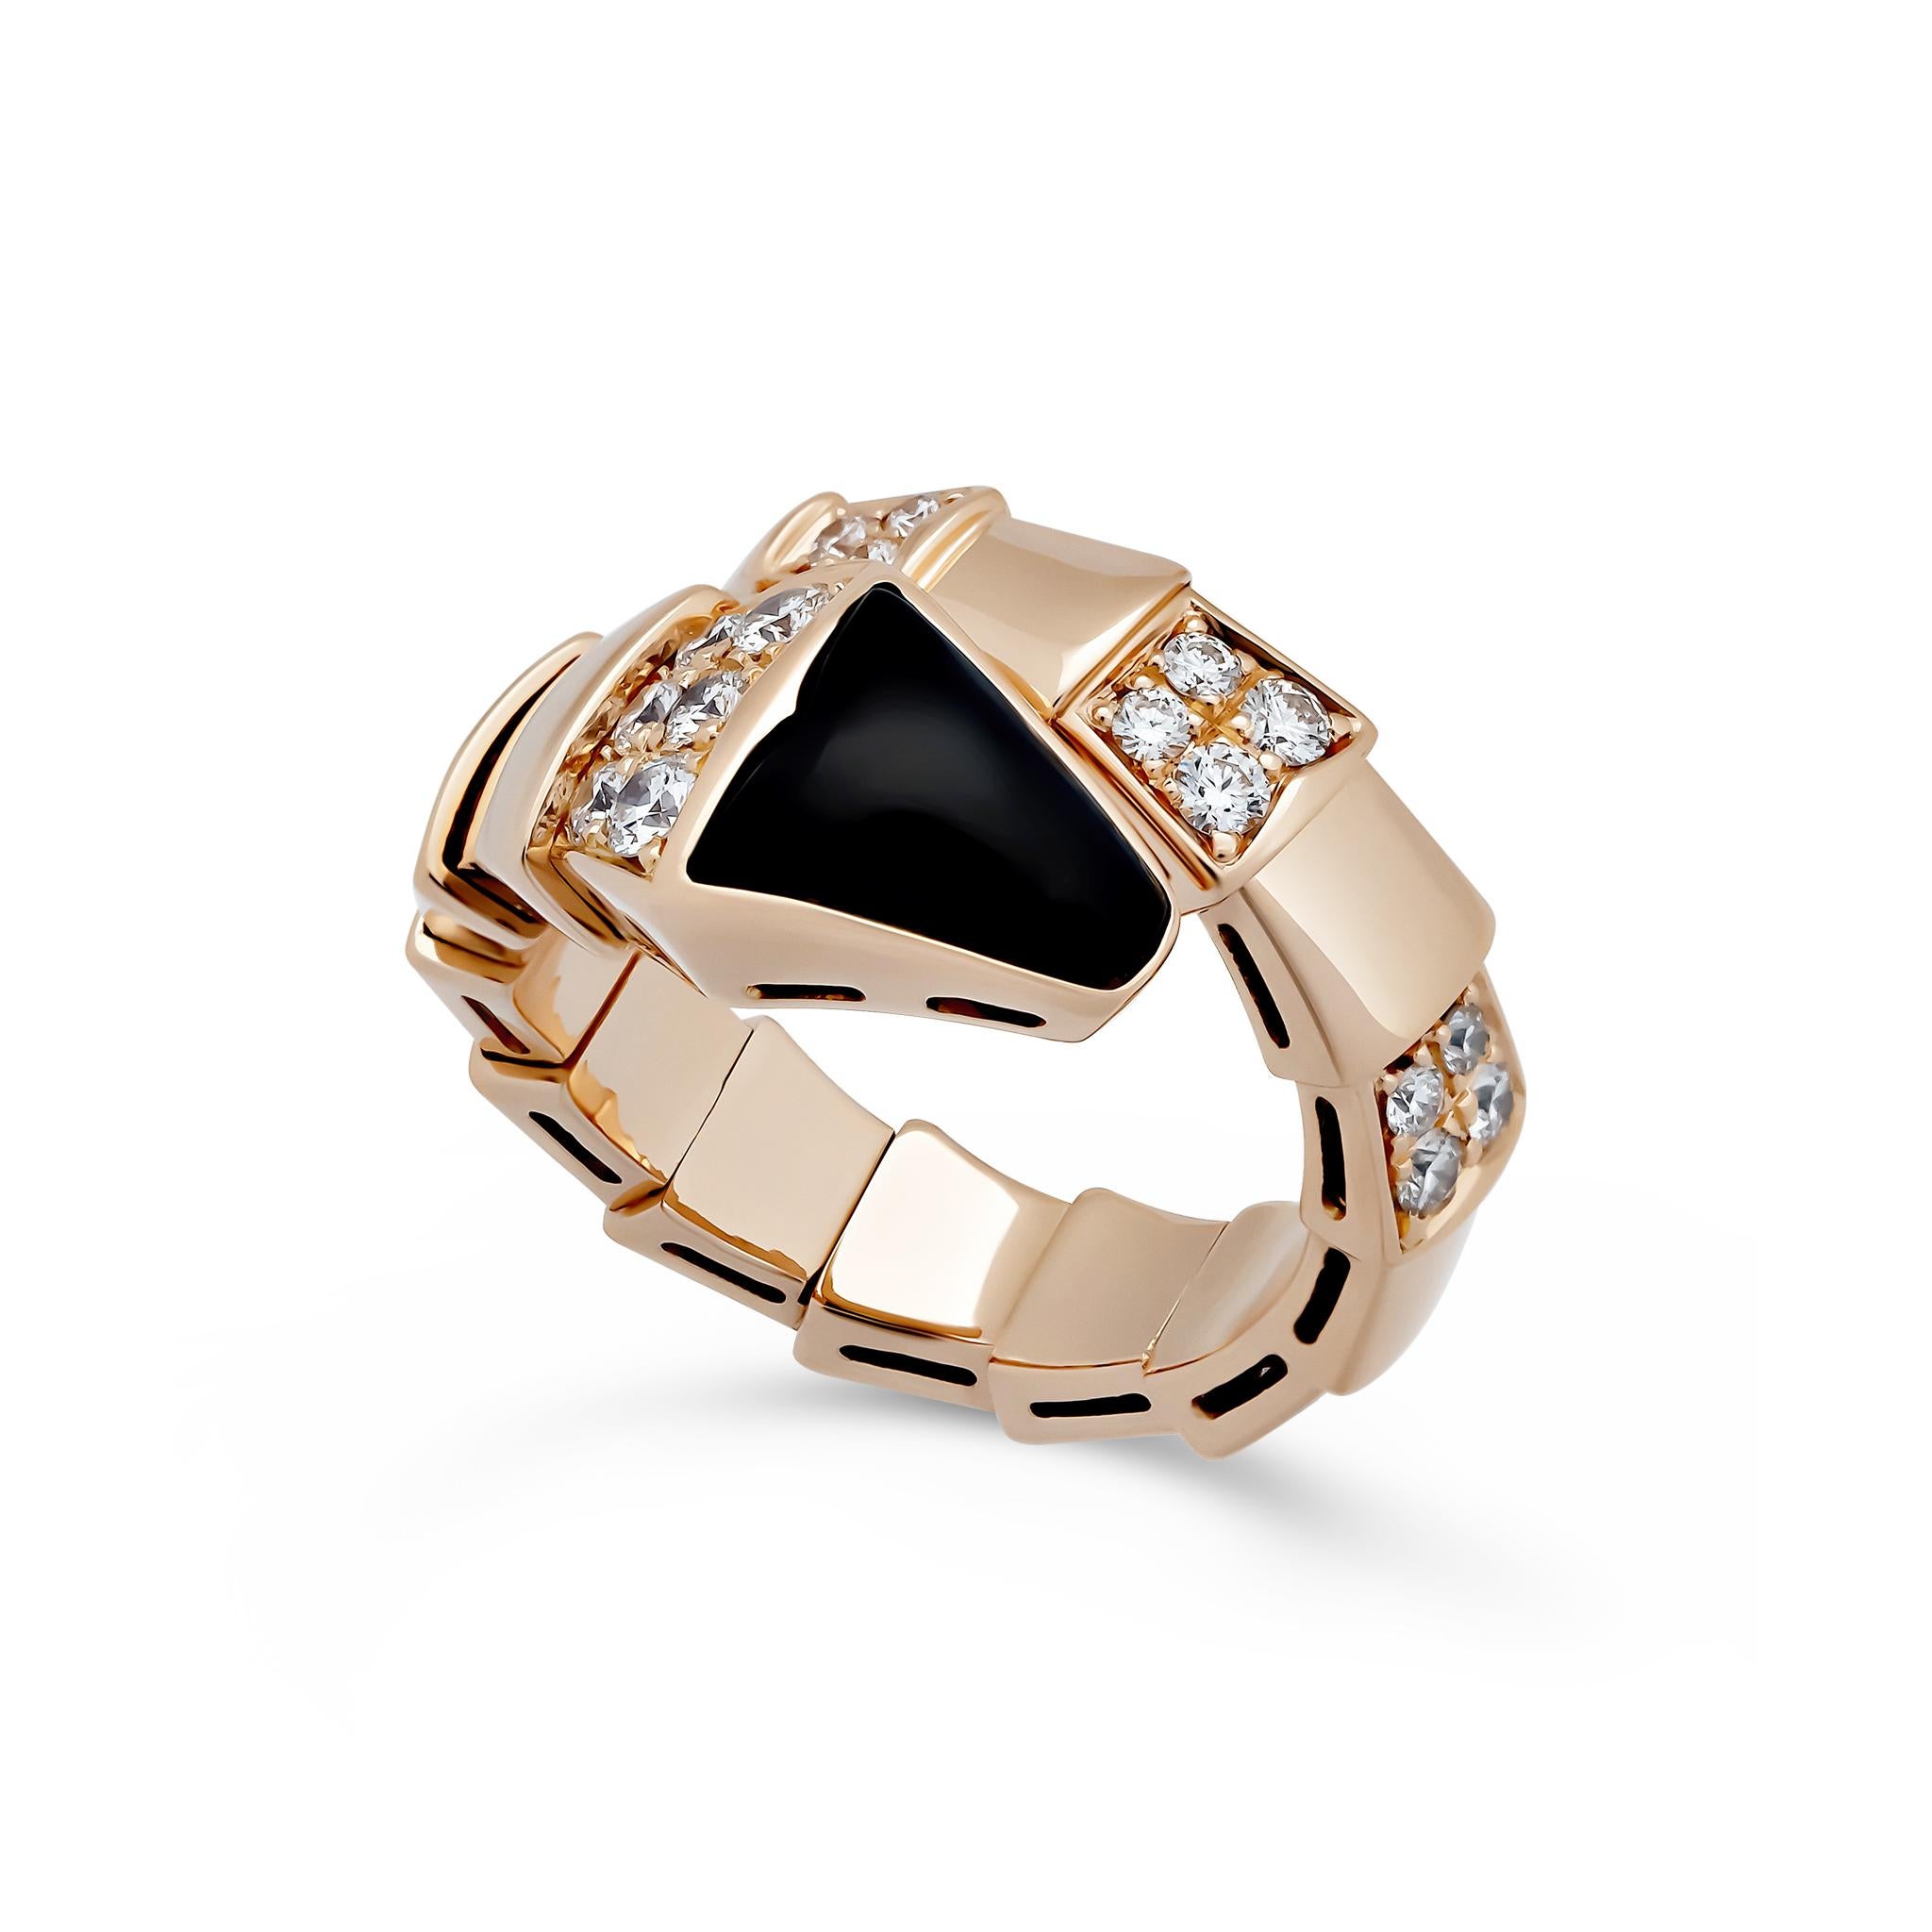 METAL TYPE: 18K Rose Gold
STONE WEIGHT: 0.90ct twd
TOTAL WEIGHT: 9.2g
RING SIZE: 5